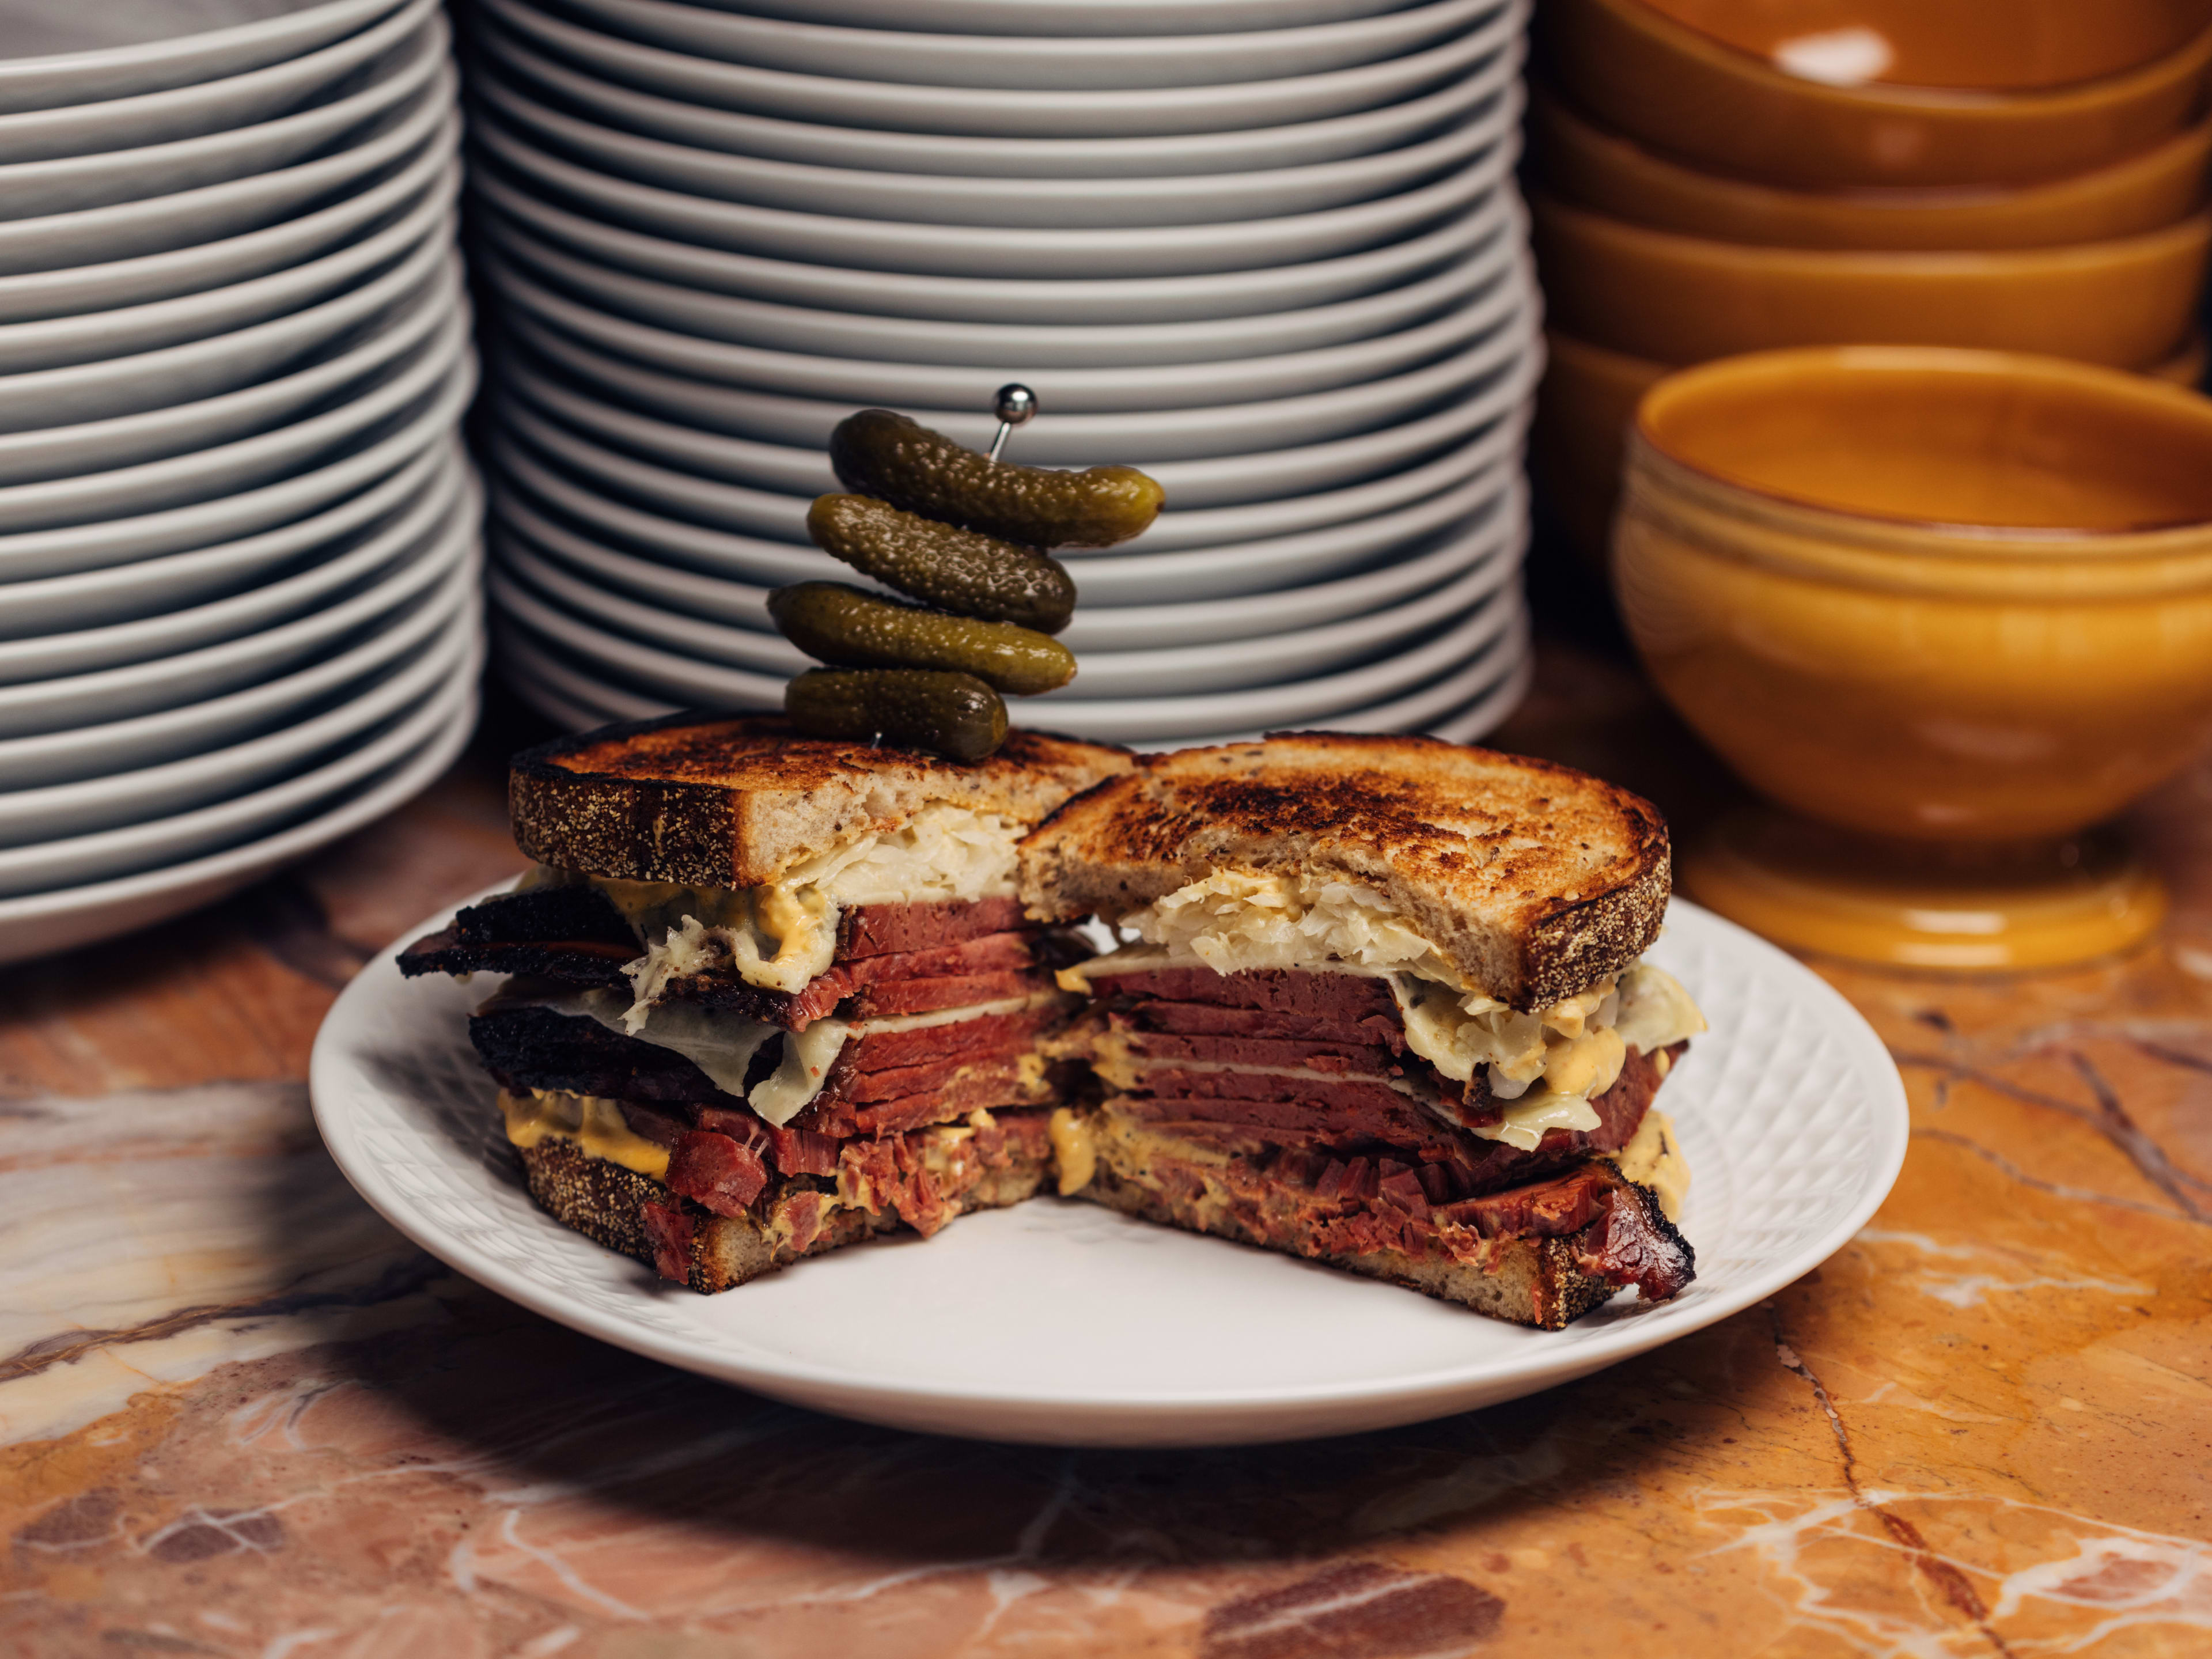 A pastrami sandwich cut in half with a skewer of cornichons in front of a stack of plates and bowls